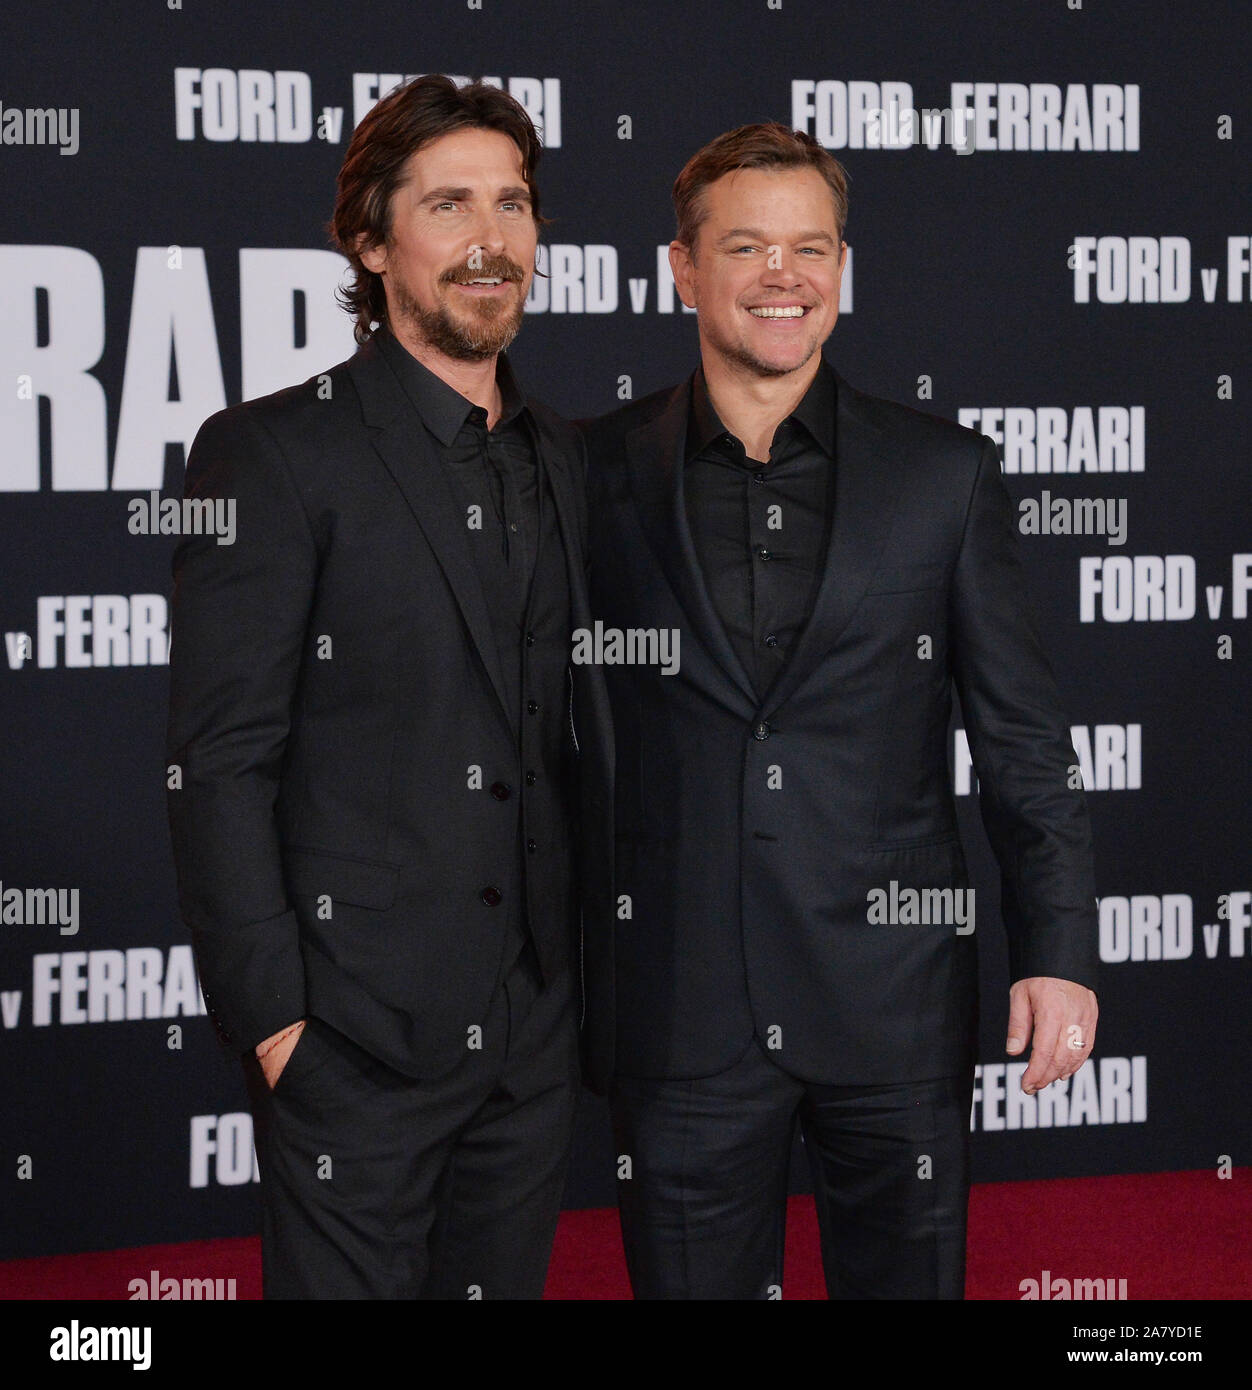 Los Angeles, USA. 4th Nov 2019. Cast members Christian Bale (L) and Matt  Damon attend the premiere of the motion picture biographical sports drama "Ford  v Ferrari" at the TCL Chinese Theatre